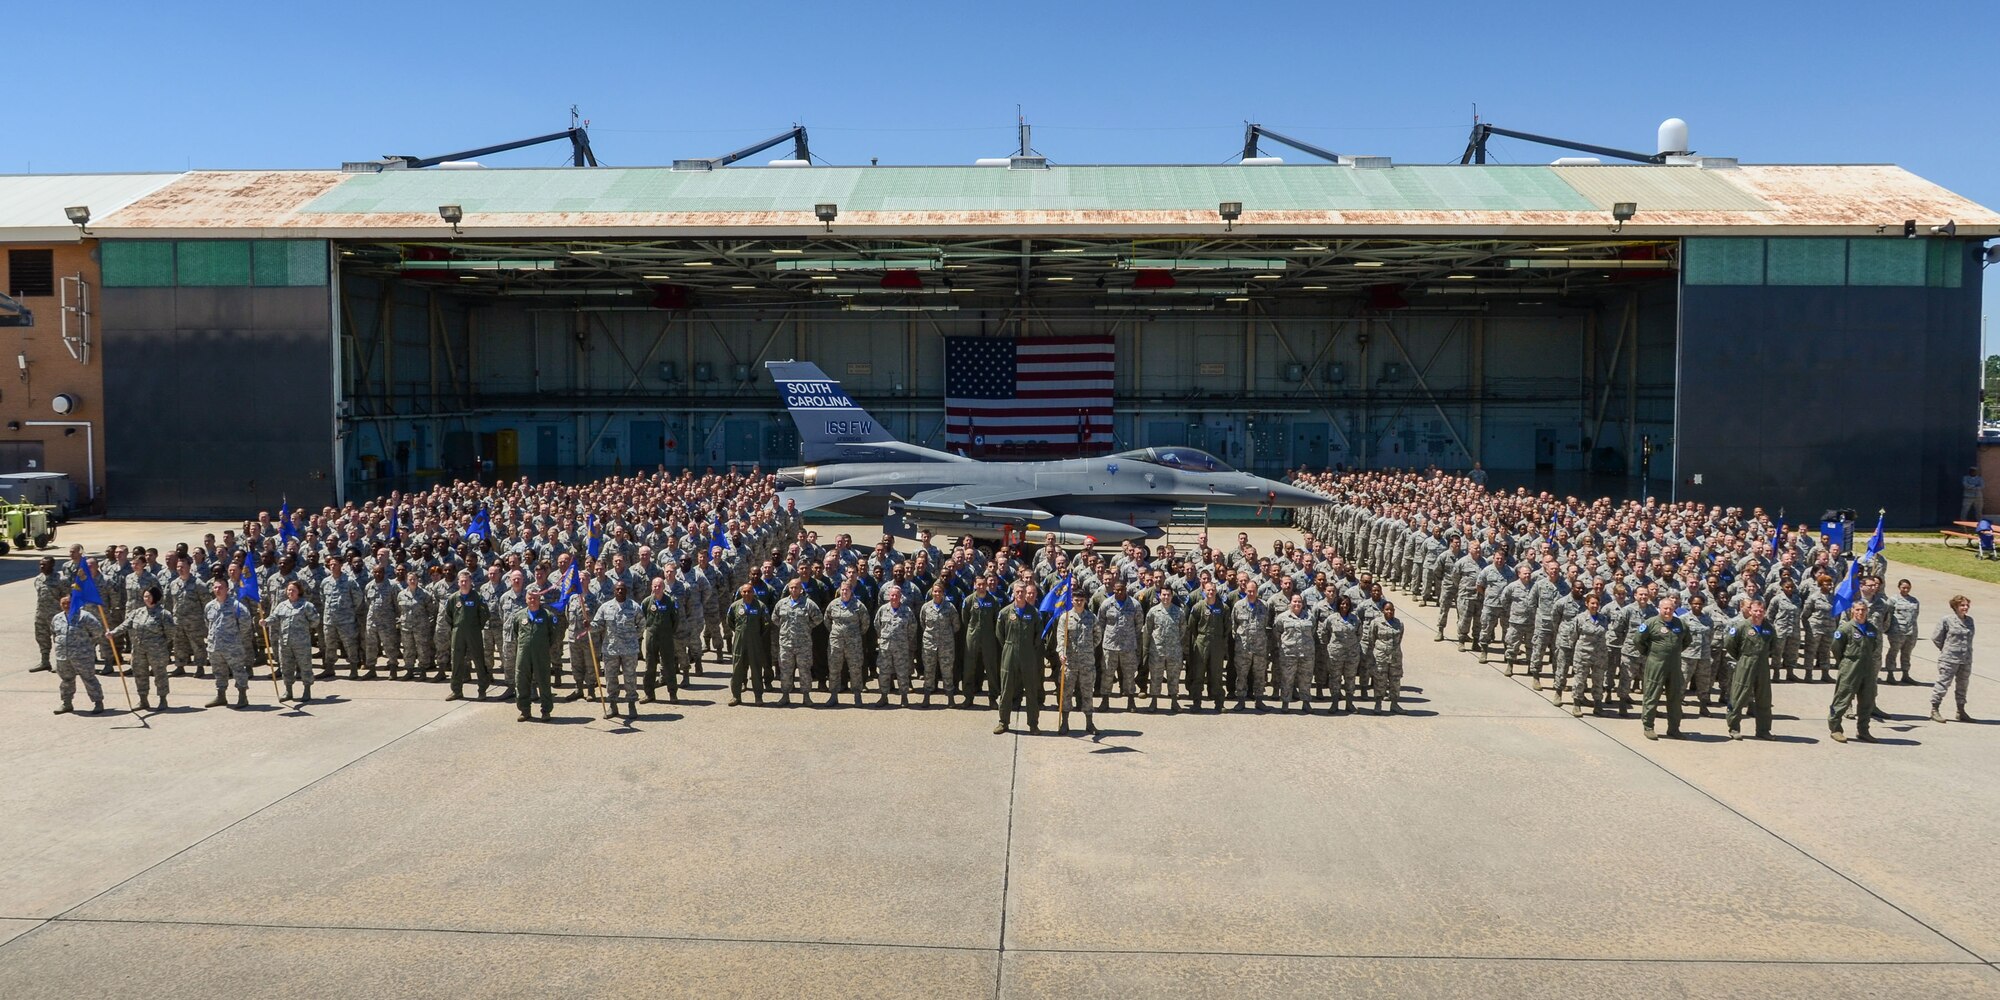 U.S. Airmen of the 169th Fighter Wing and the South Carolina Air National Guard, assemble for a change of command ceremony at McEntire Joint National Guard Base, S.C., May 3, 2014. Col. Michael Manning relinquishes command of the 169th Fighter Wing to Col. David Meyer and Col. Keith Miller assumes command of the 169th Operations Group. (U.S. Air National Guard photo by Senior Master Sgt. Edward Snyder/Released)